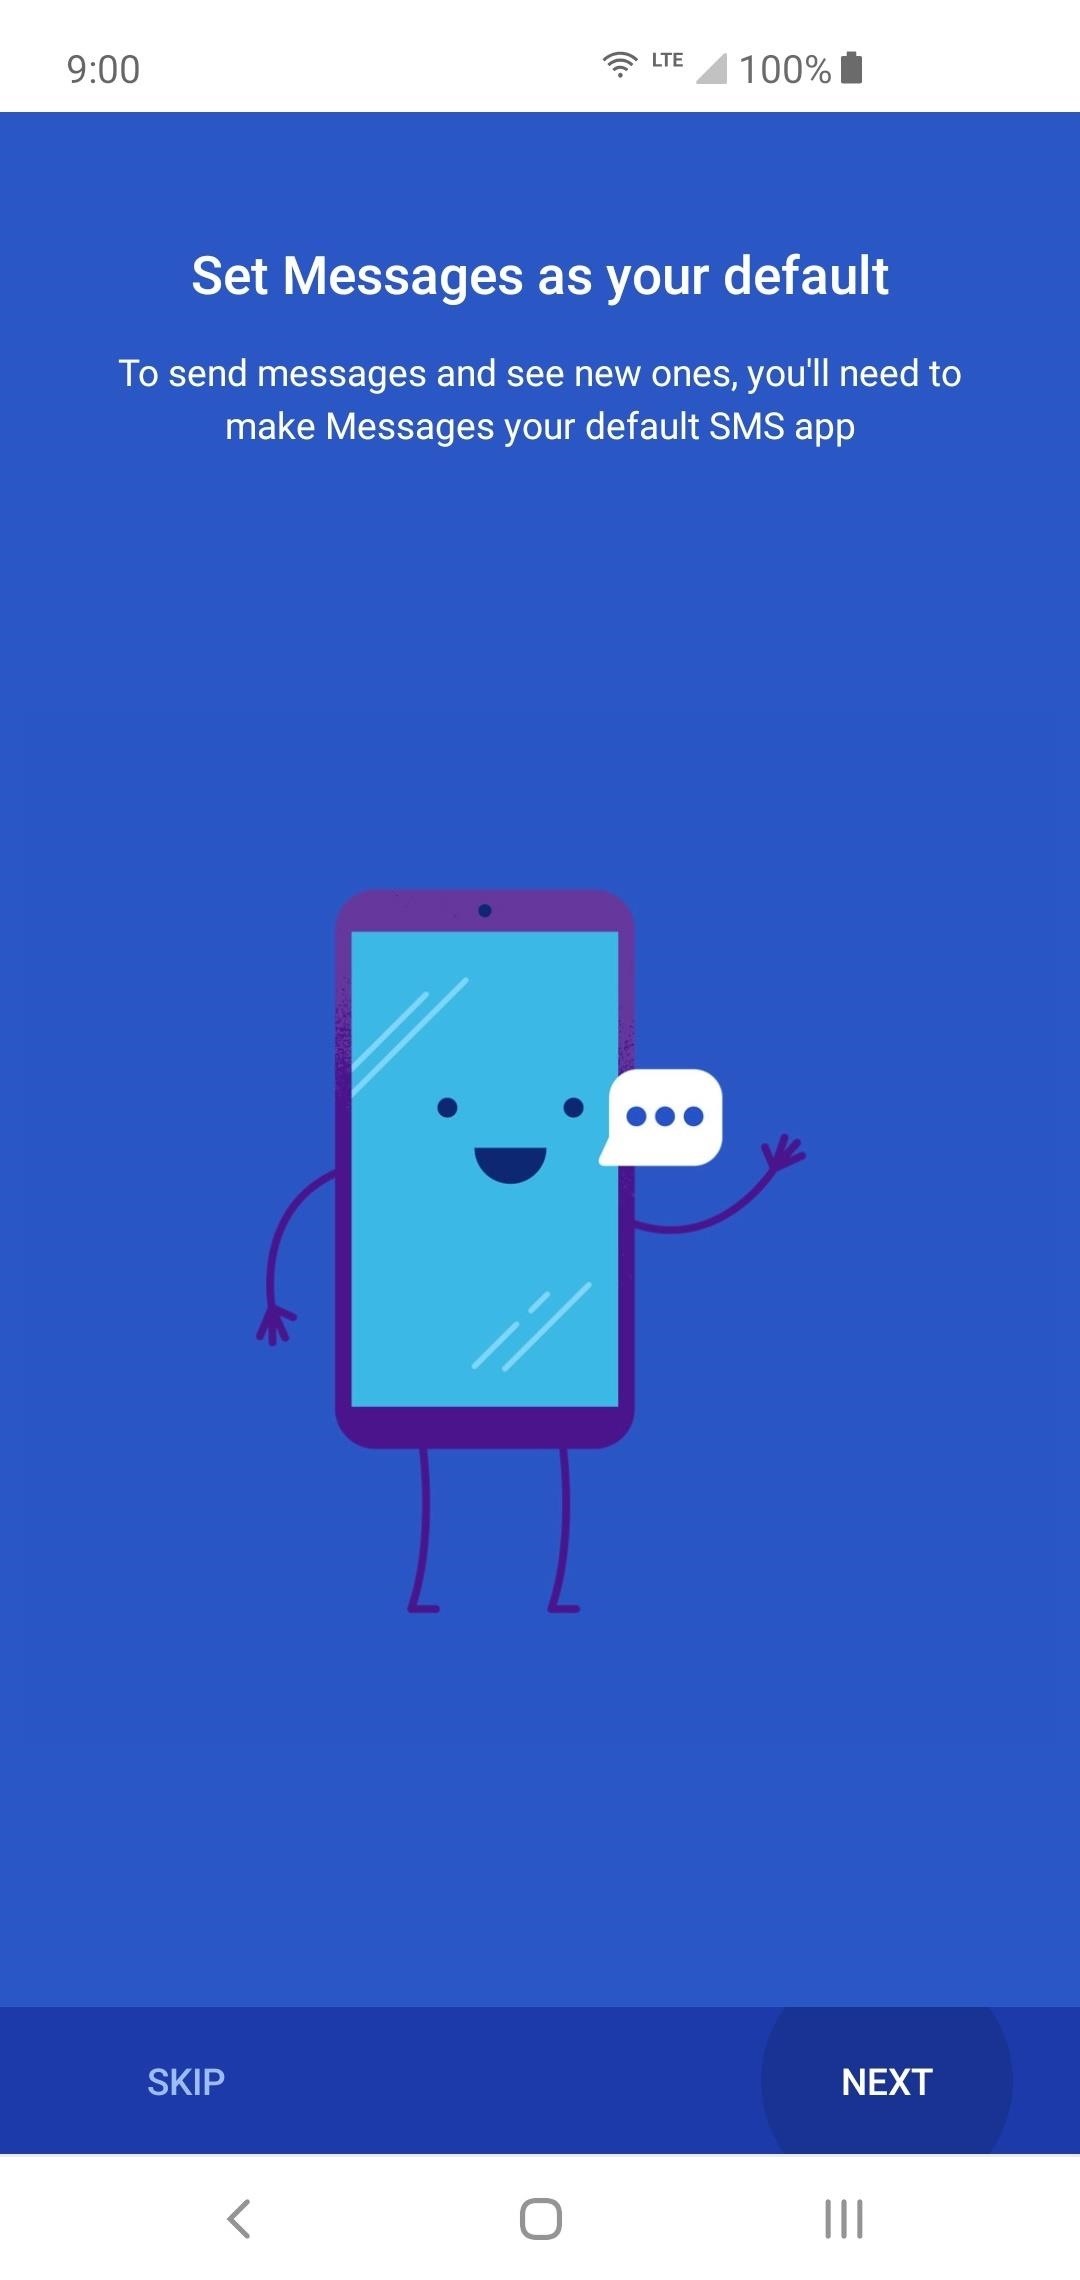 How to Make Android Messages the Default SMS App on Any Phone